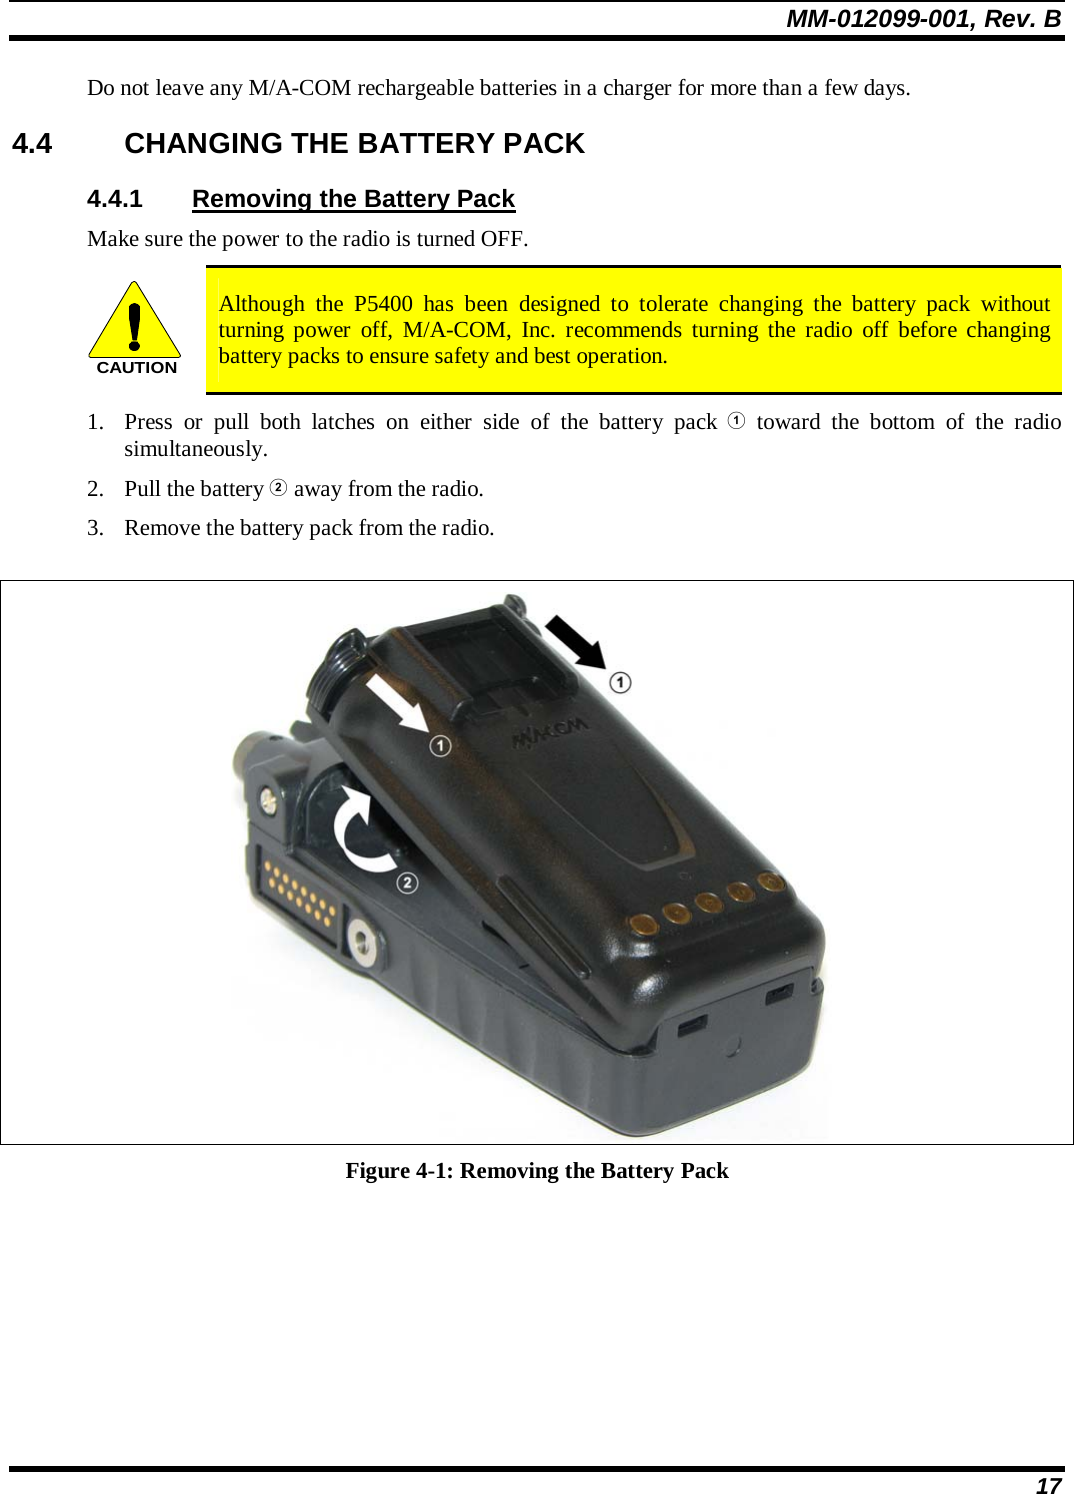 MM-012099-001, Rev. B 17 Do not leave any M/A-COM rechargeable batteries in a charger for more than a few days.  4.4  CHANGING THE BATTERY PACK 4.4.1  Removing the Battery Pack Make sure the power to the radio is turned OFF. CAUTION Although the P5400 has been designed to tolerate changing the battery pack without turning power off, M/A-COM, Inc. recommends turning the radio off before changing battery packs to ensure safety and best operation. 1. Press or pull both latches on either side of the battery pack  toward the bottom of the radio simultaneously.  2. Pull the battery  away from the radio. 3. Remove the battery pack from the radio.   Figure 4-1: Removing the Battery Pack 